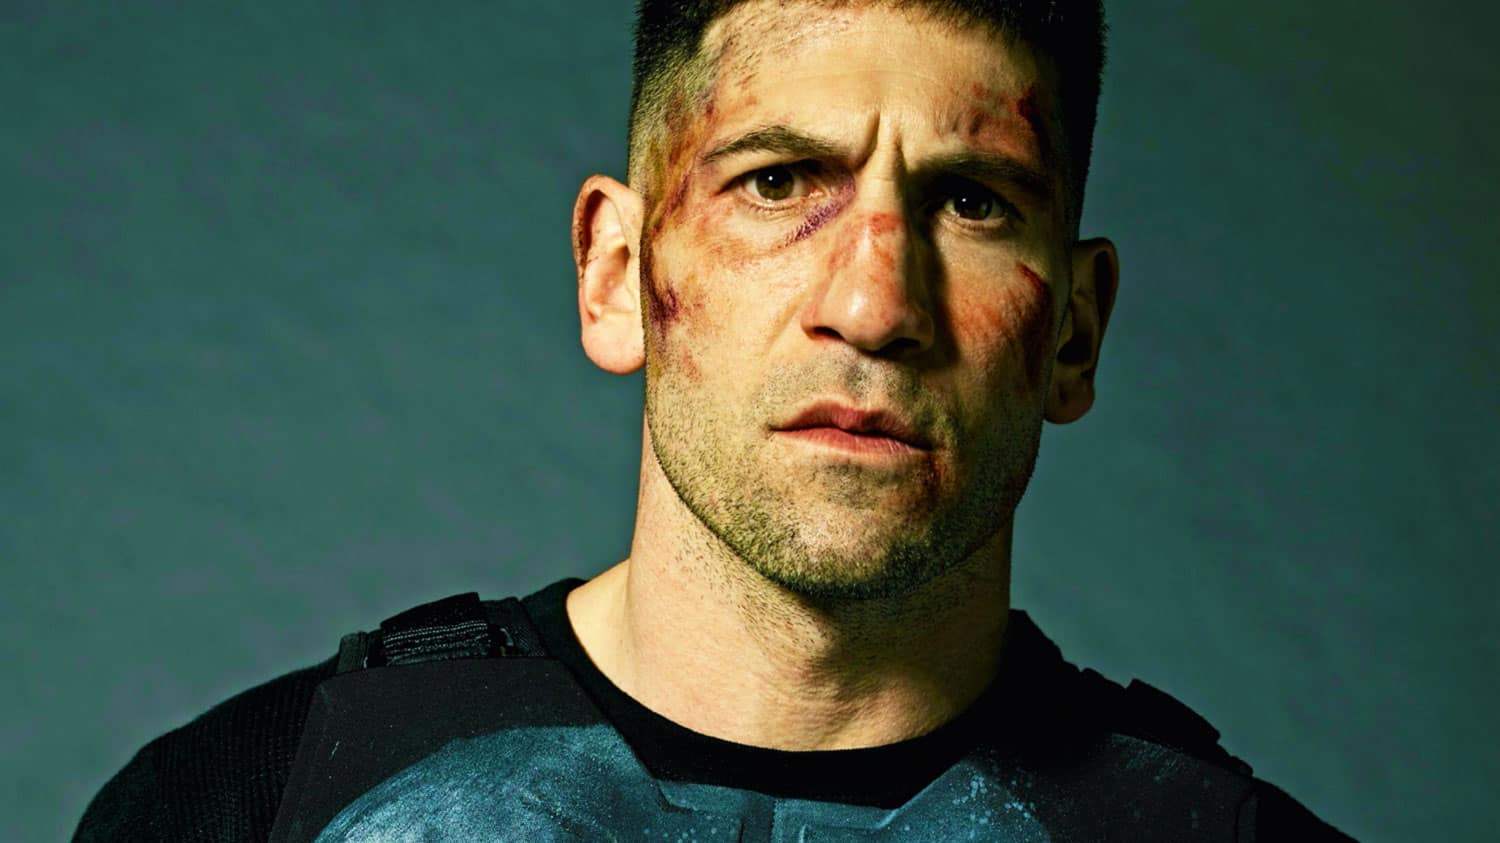 New-Punisher-Series-With-Jon-Bernthal-Rumored-For-Disney-Plus